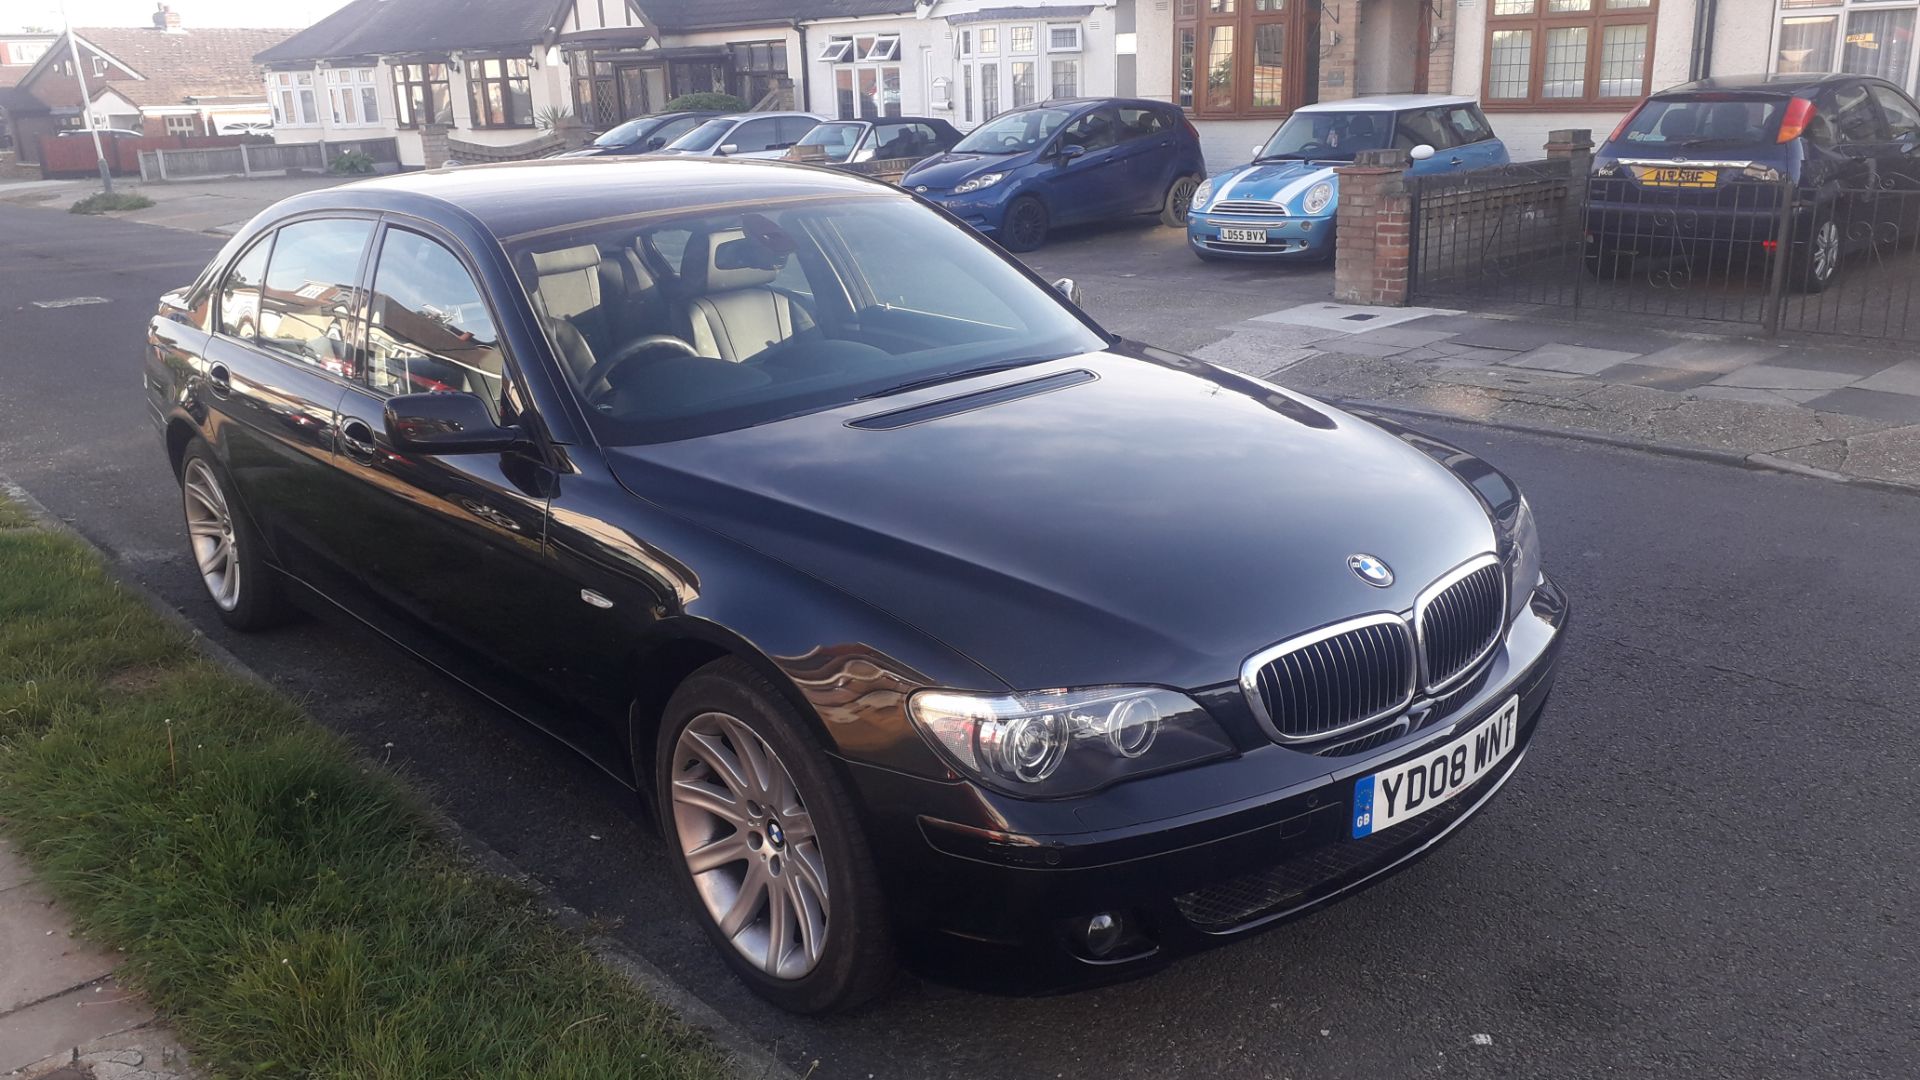 BMW 730Ld SE 4 Door Auto Saloon, colour black, registration YD08 WNT, first registered 21 March - Image 3 of 32